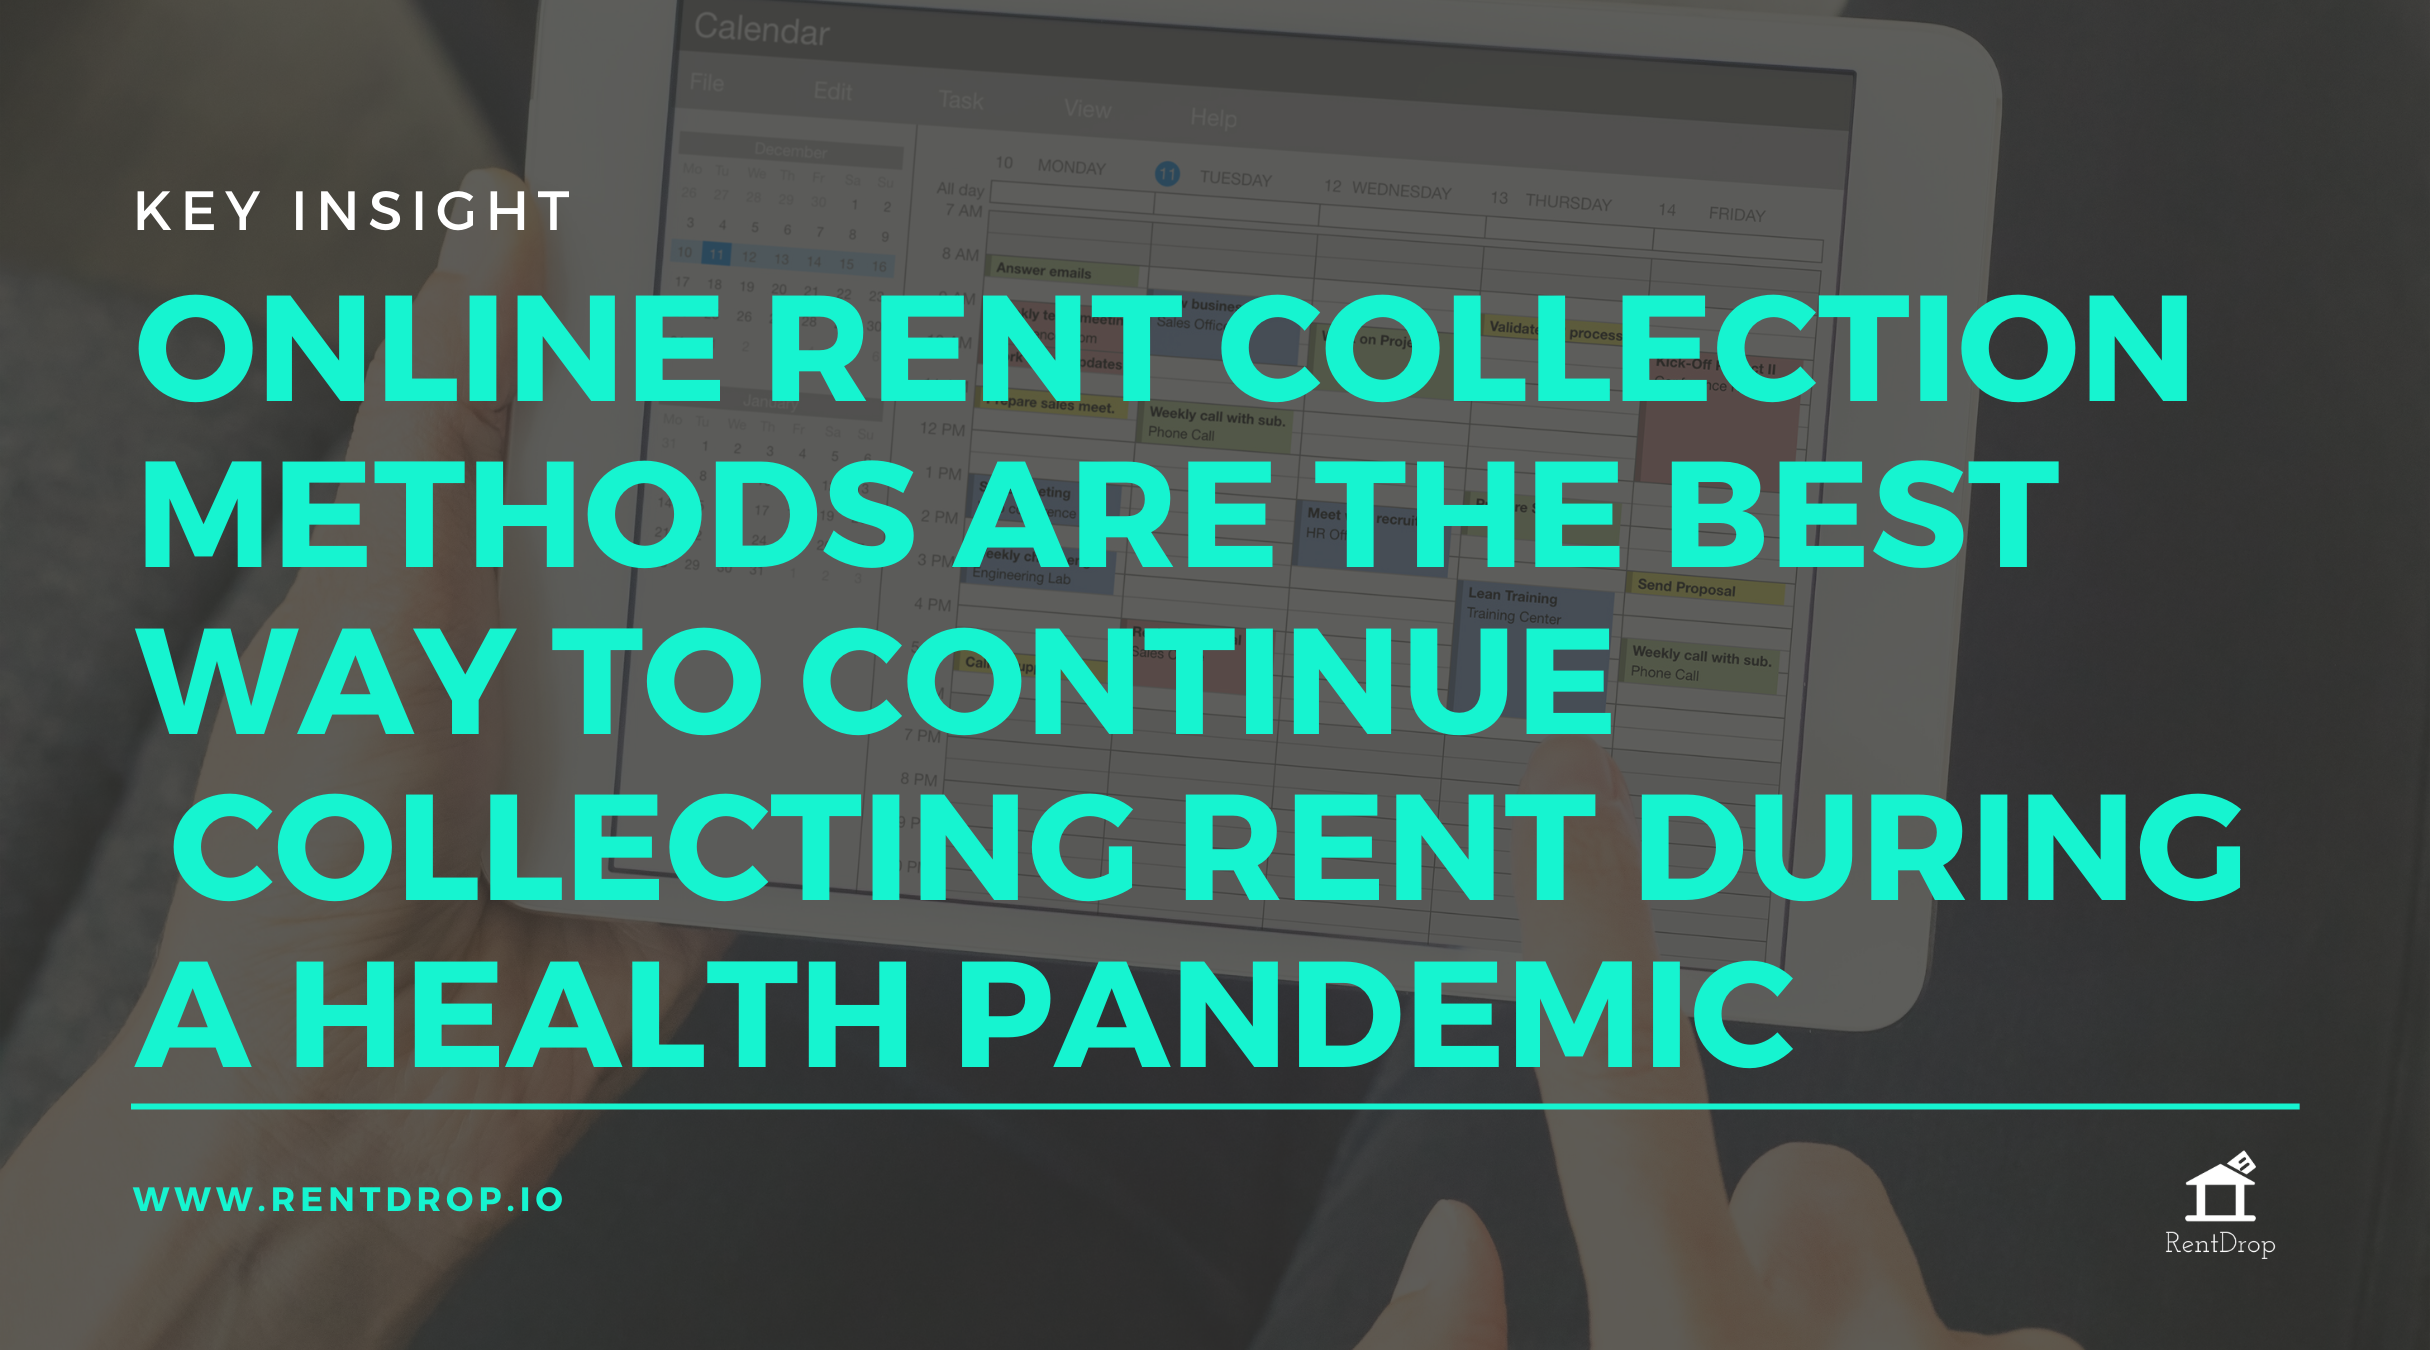 rentdrop pandemic covid-19 quote